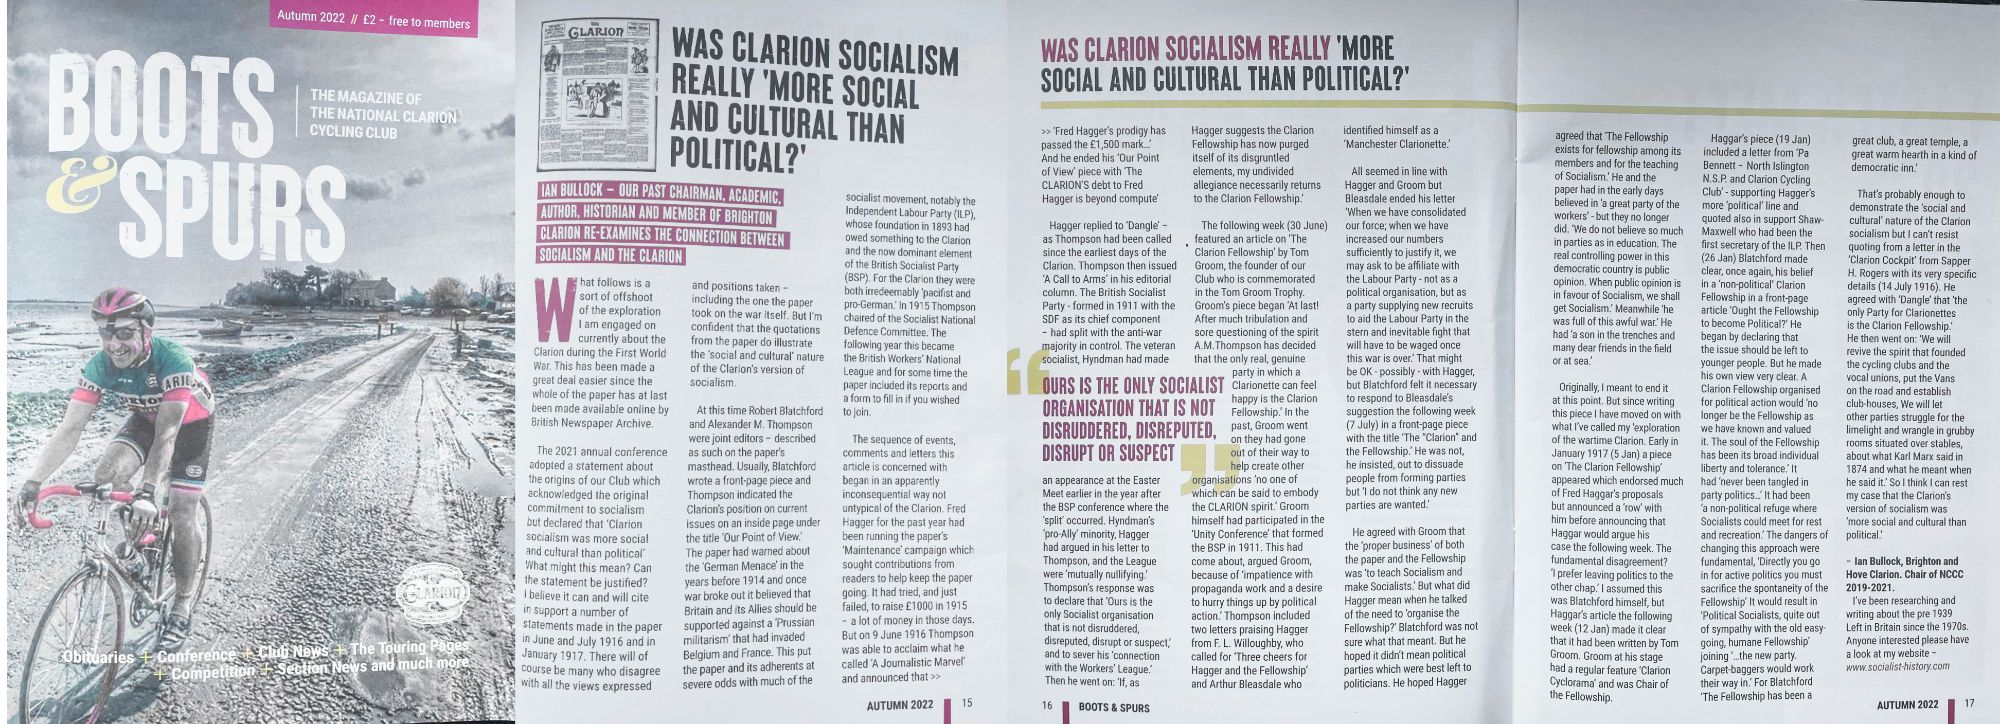 Was Clarion socialism really 'more social and cultural than political?